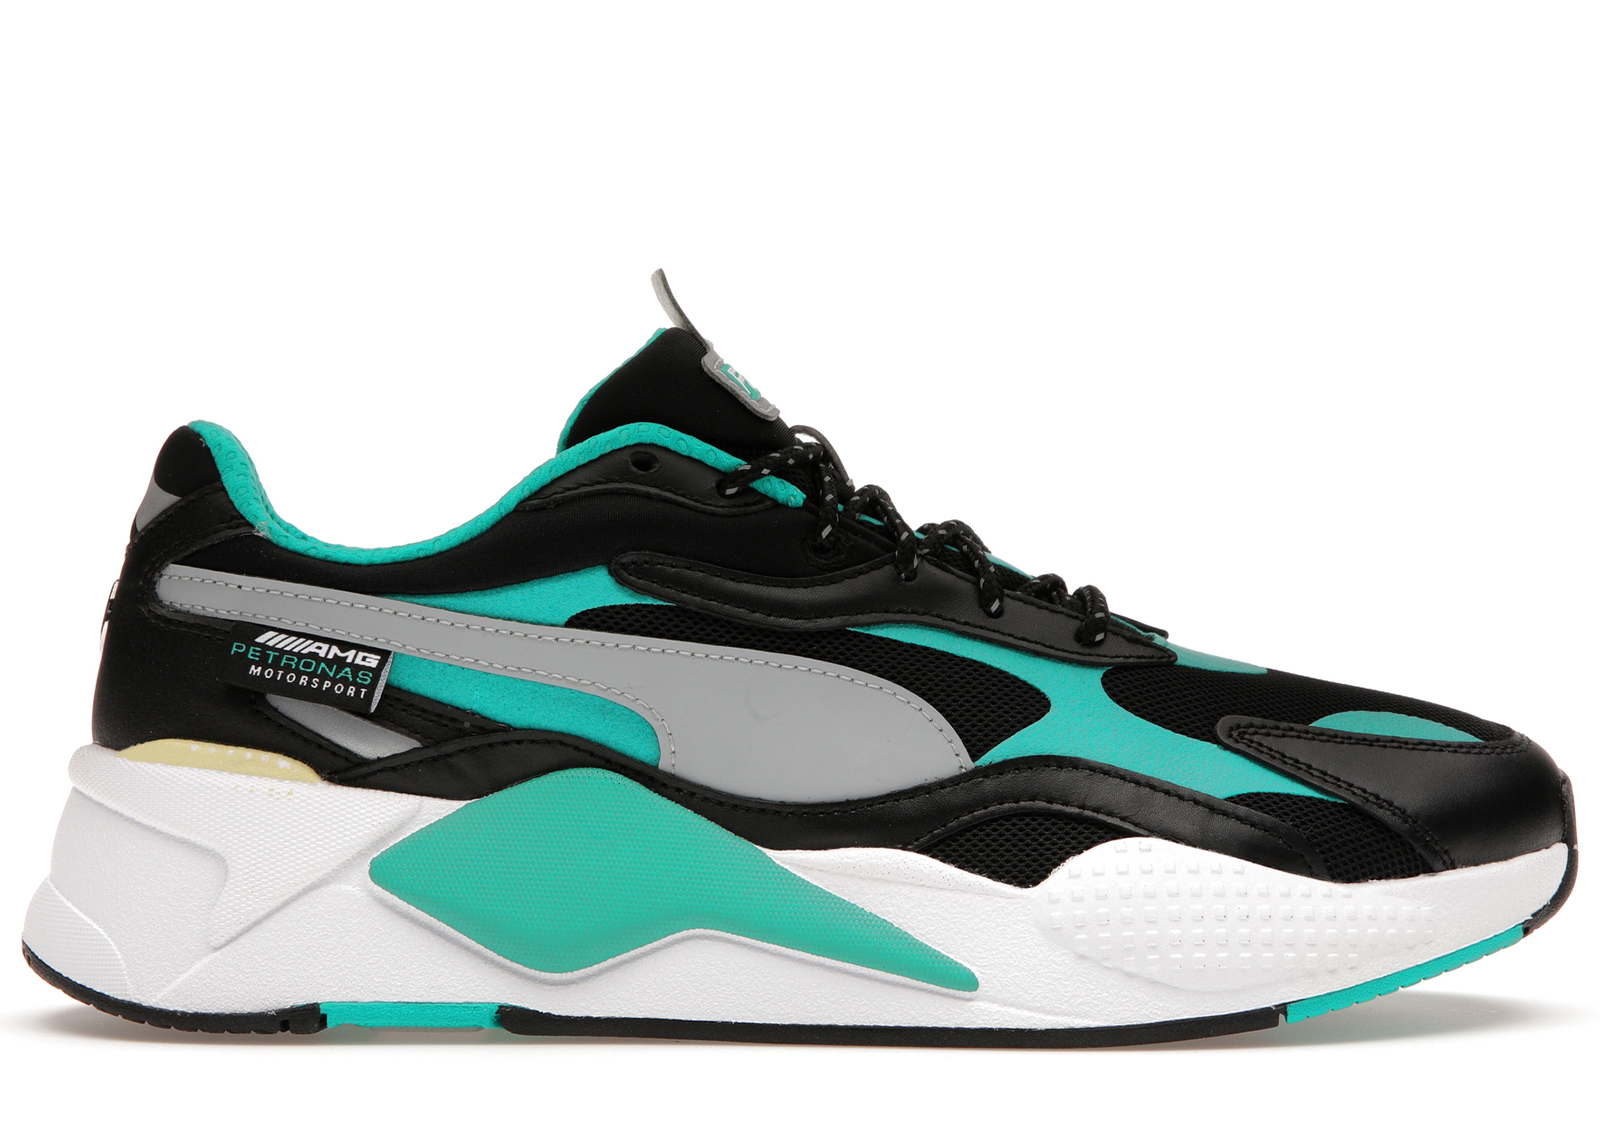 PUMA Motorsport Unisex Solid Mercedes AMG Petronas F1 Maco SL Sneakers  Price in India, Full Specifications & Offers | DTashion.com